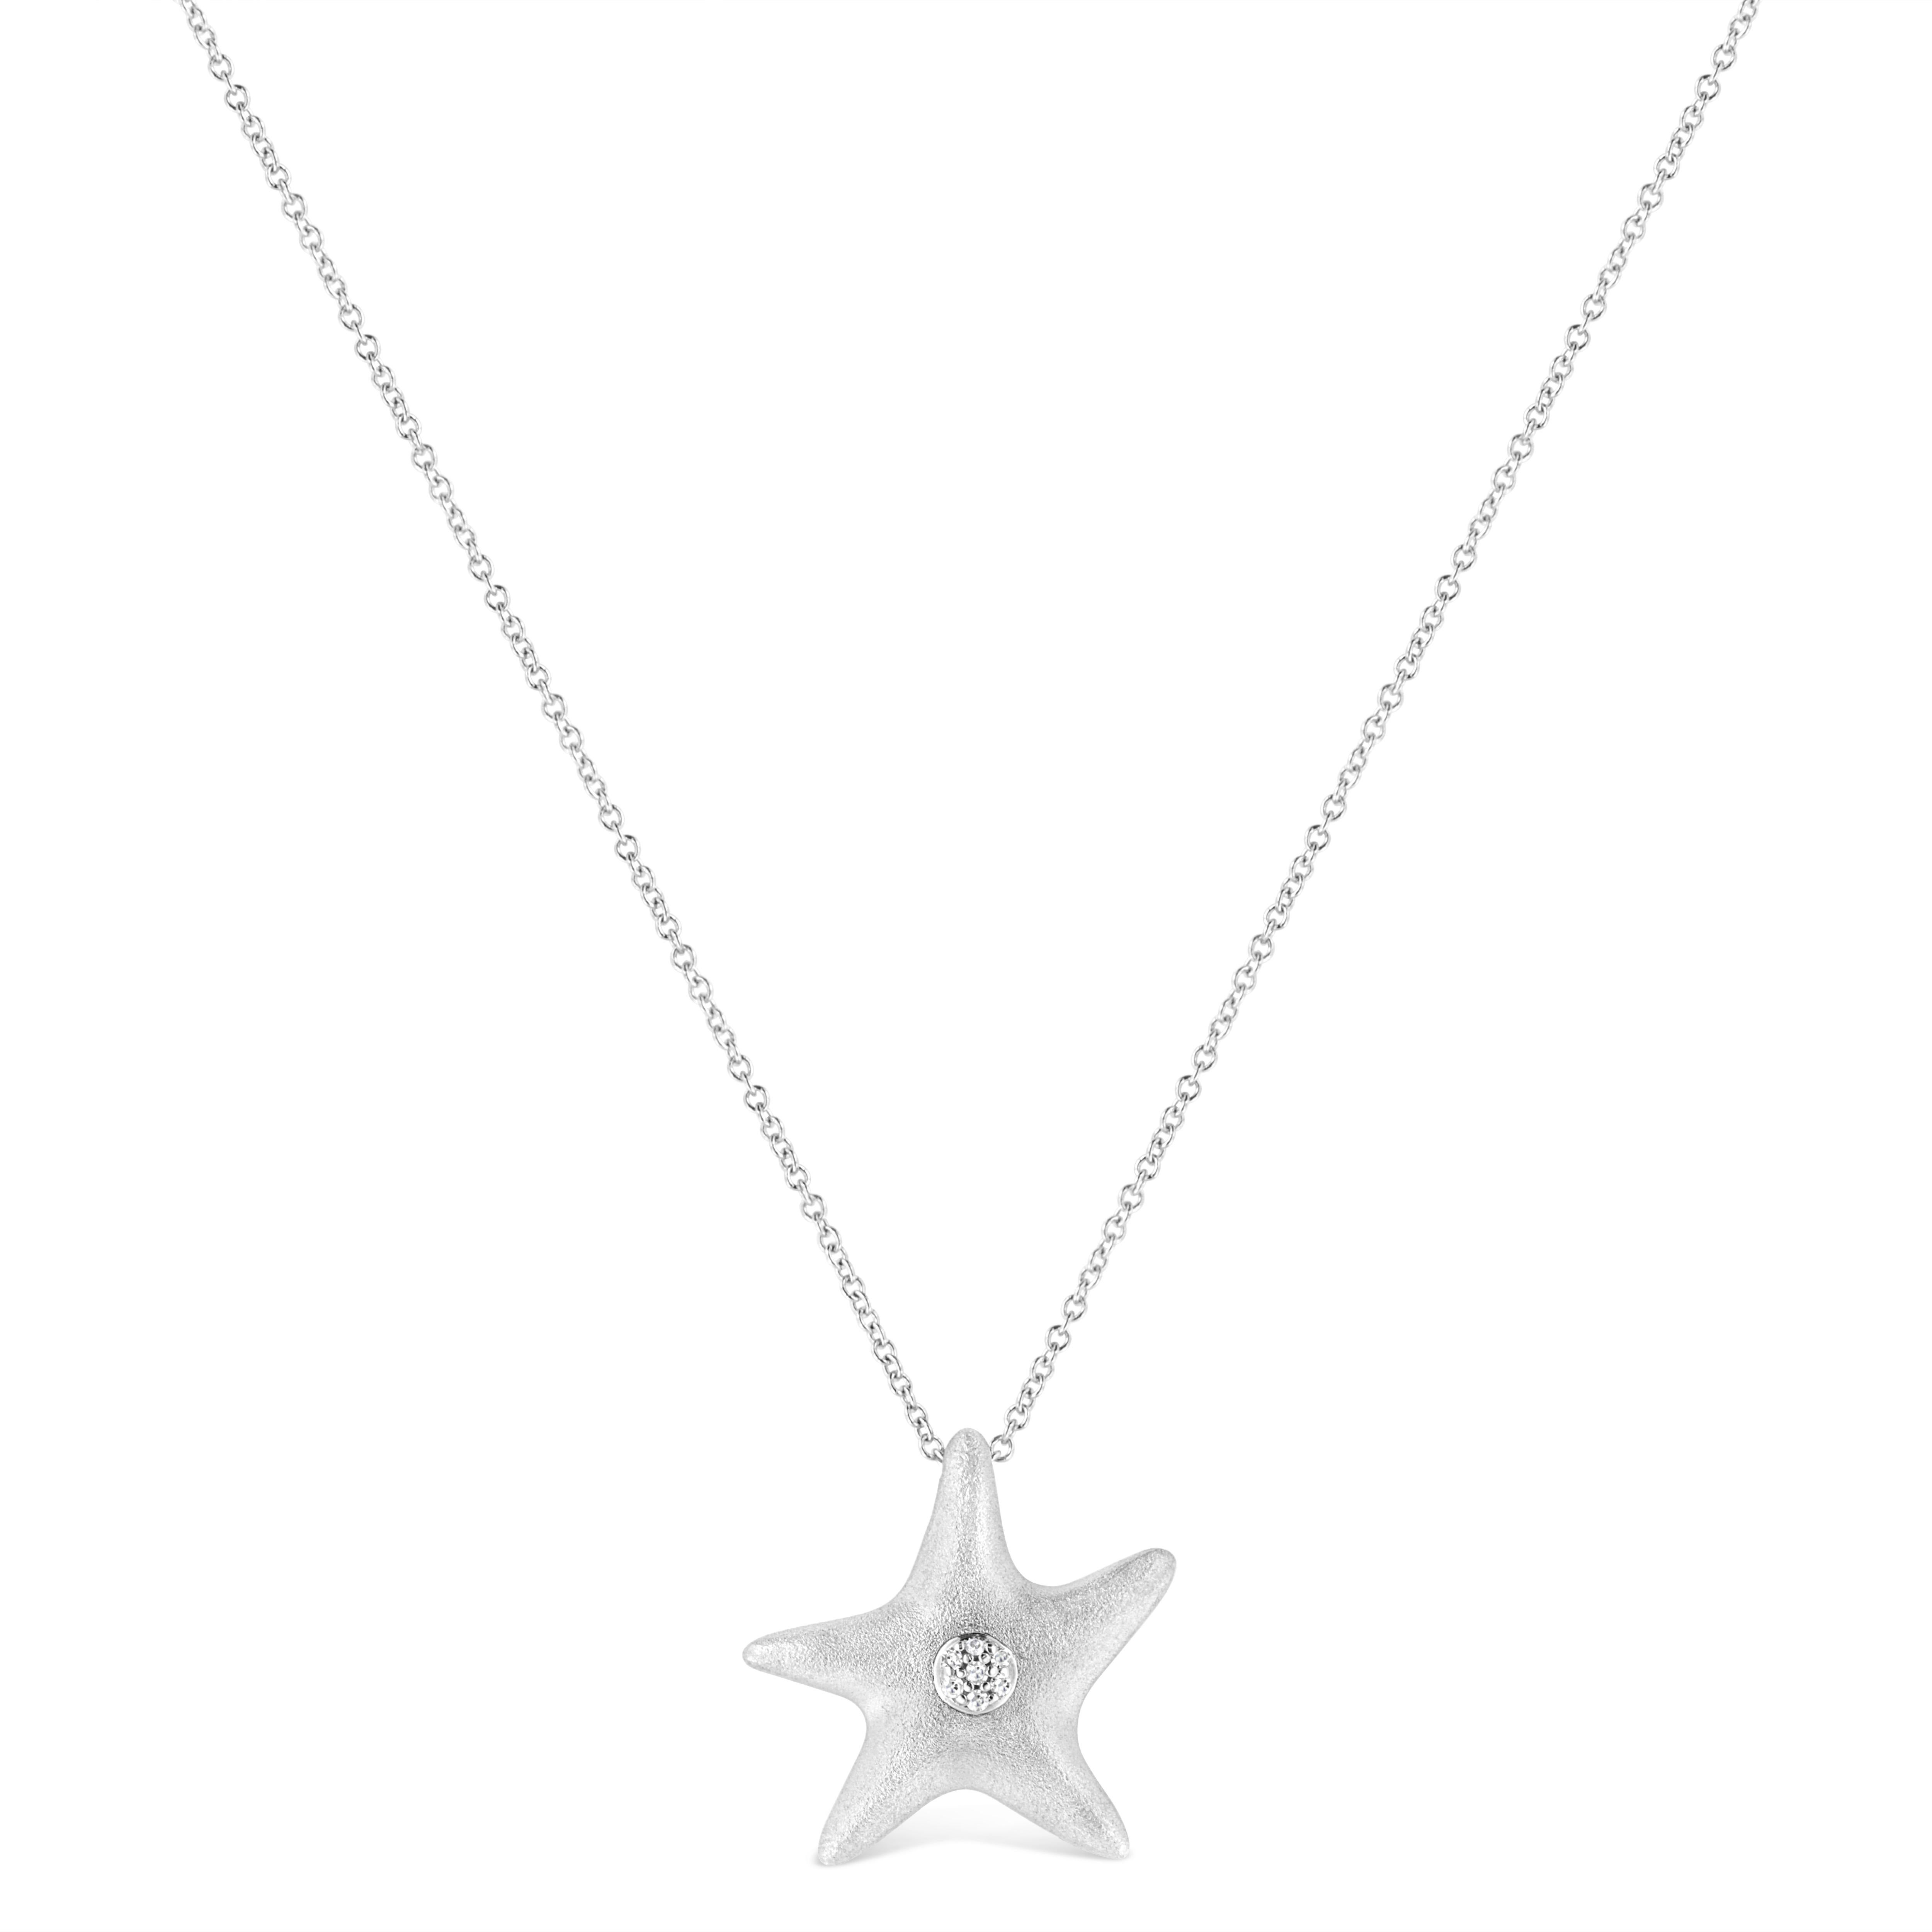 Beguile her with starbursts of light-reflecting beauty of this gorgeous diamond star fish pendant crafted in sterling silver. The center of the star fish is adorn with a cluster of 7 prong set shimmering single cut diamonds. This dainty pendant